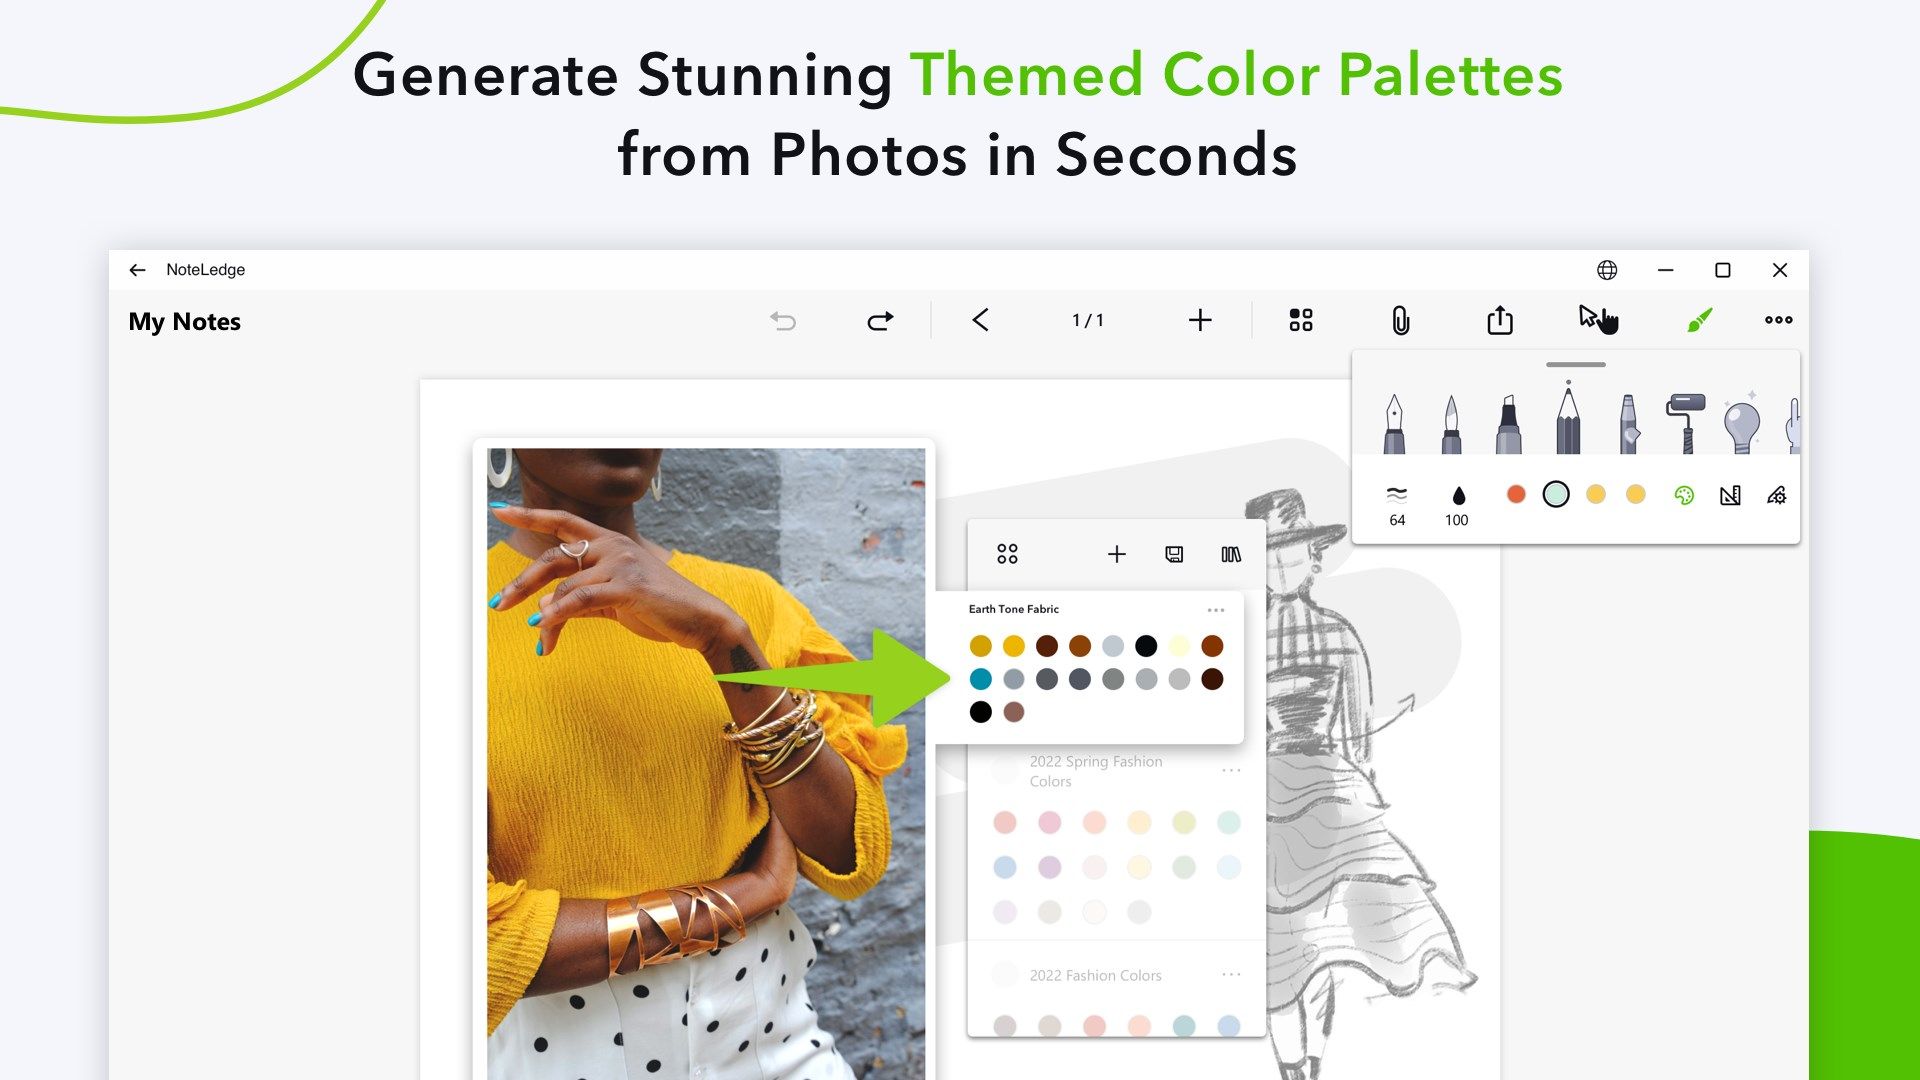 Generate Stunning Themed Color Palettes from Photos in Seconds